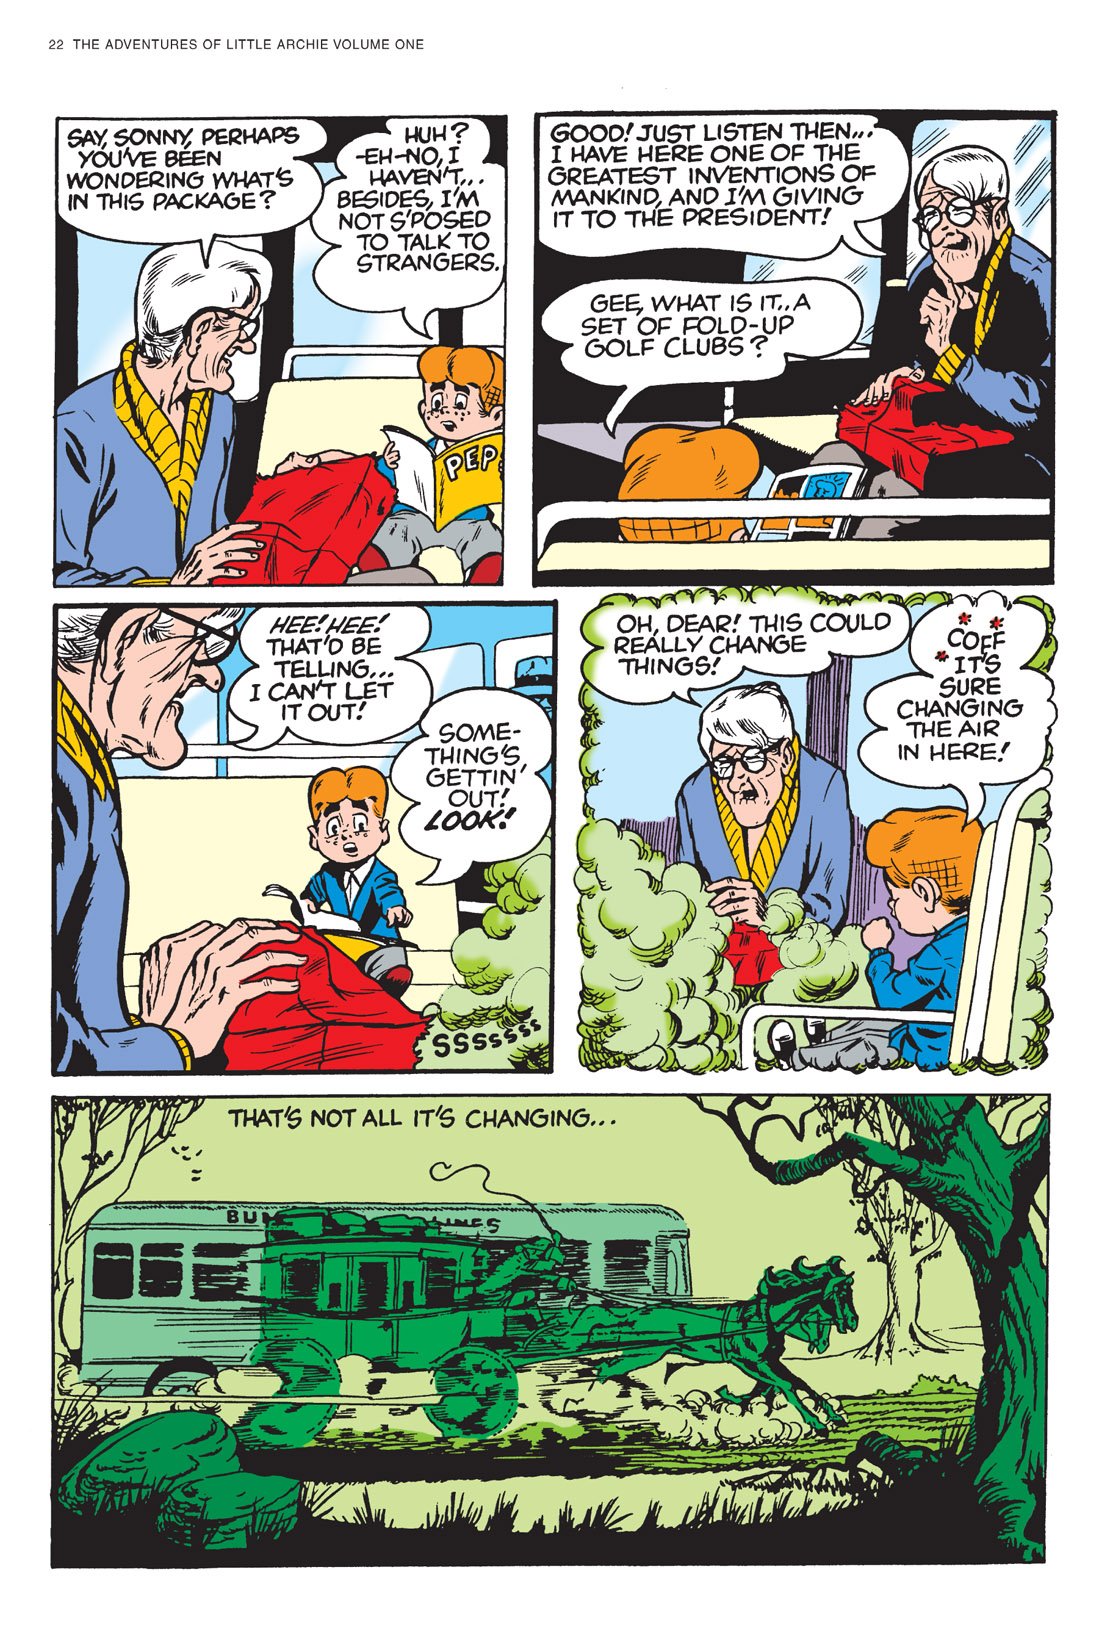 Read online Adventures of Little Archie comic -  Issue # TPB 1 - 23